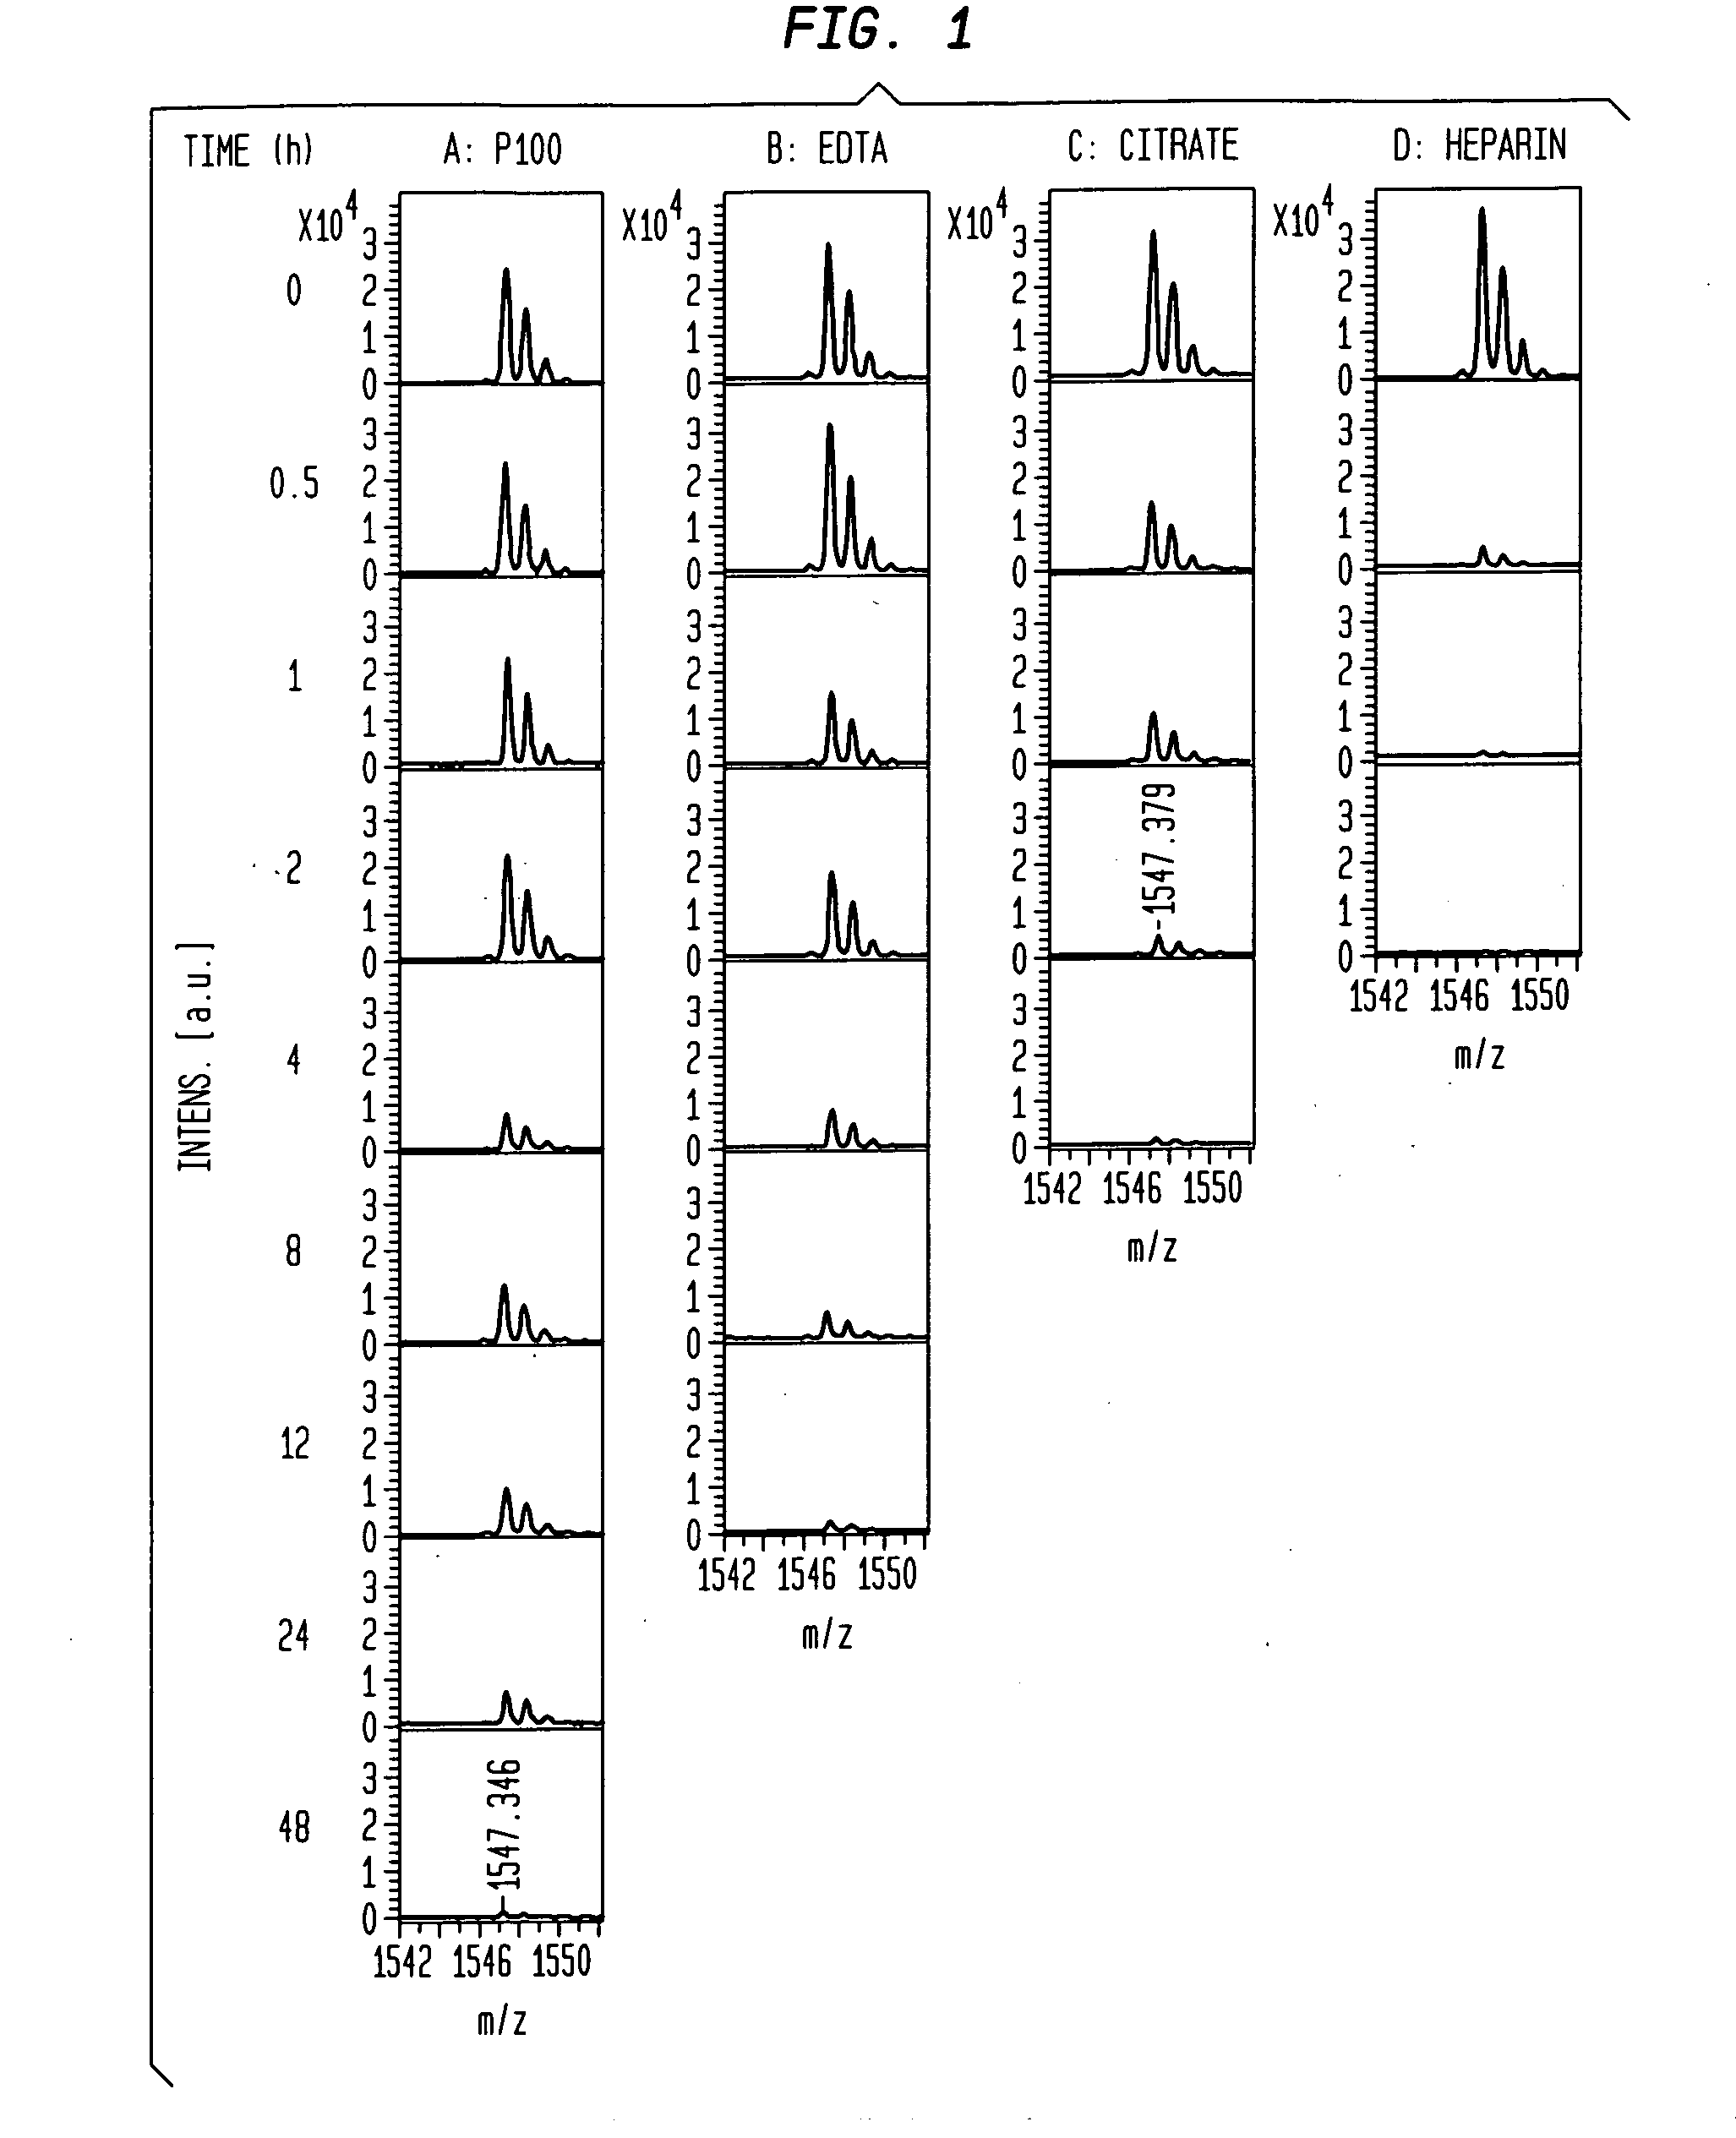 System and method for diagnosing diseases